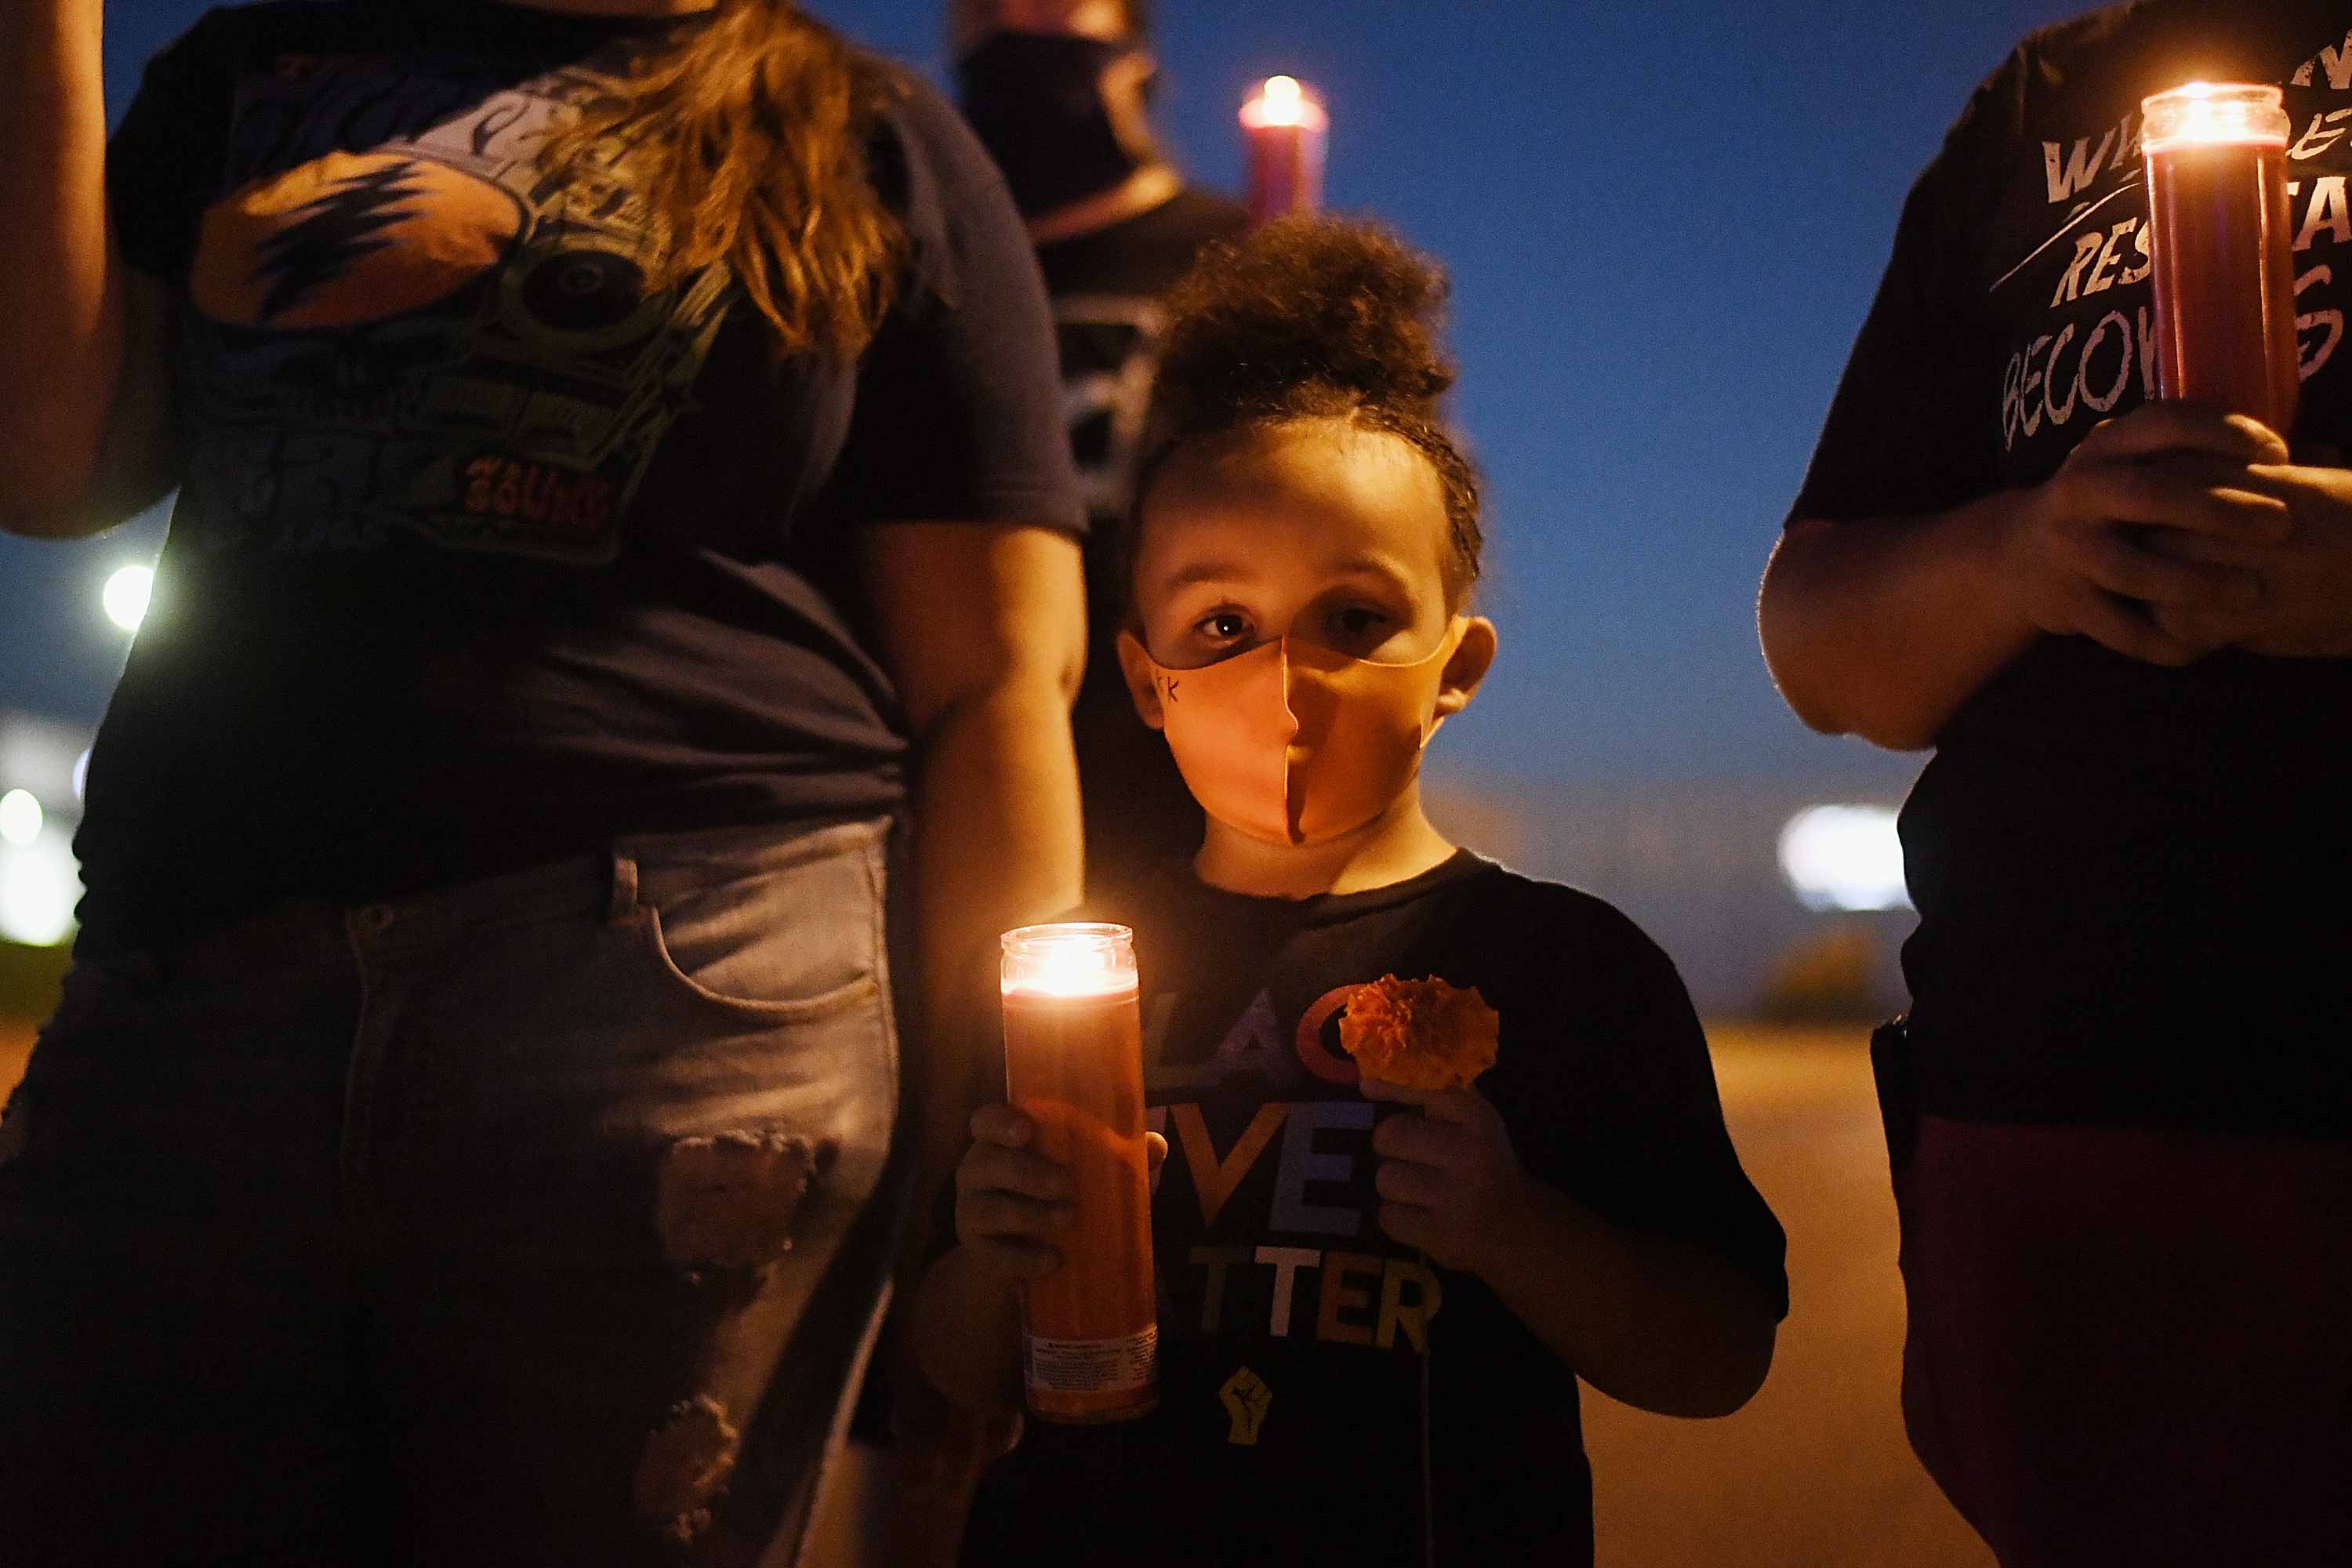 A young Black girl wearing a protective mask holds a candle in her hand while surrounded by adults.